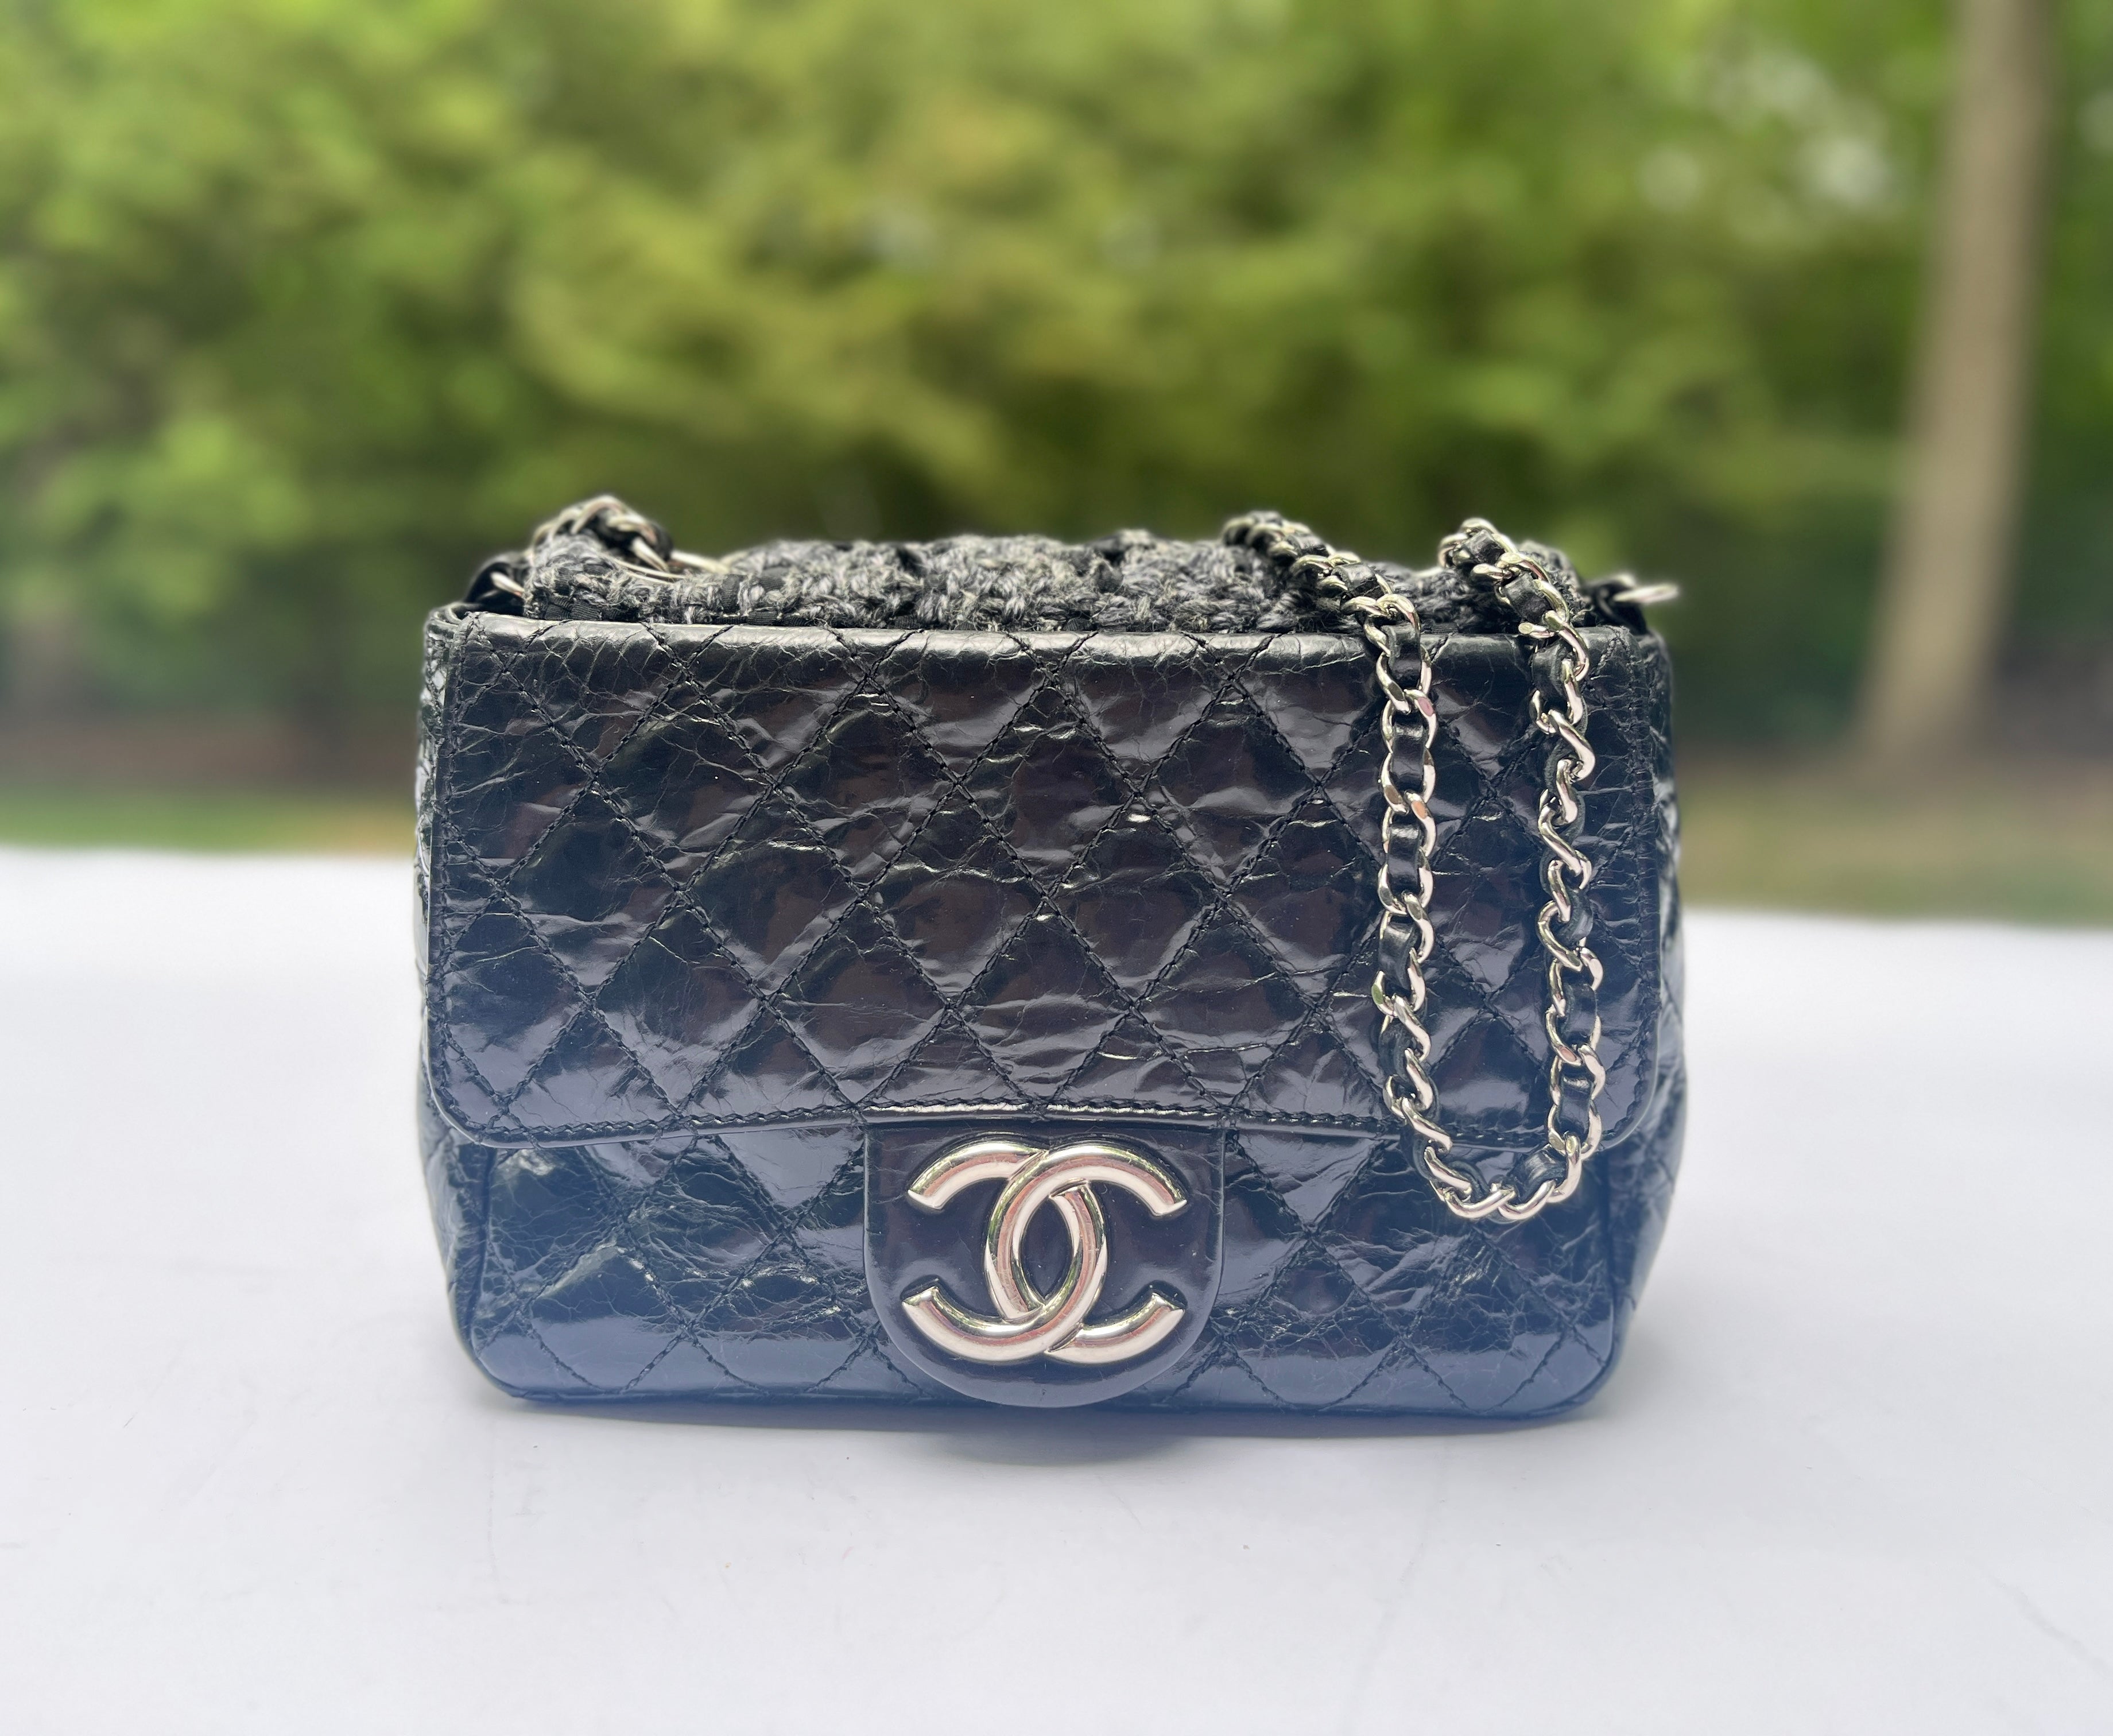 Authenticating the Chanel Mini Square Flap Bag - Academy by FASHIONPHILE